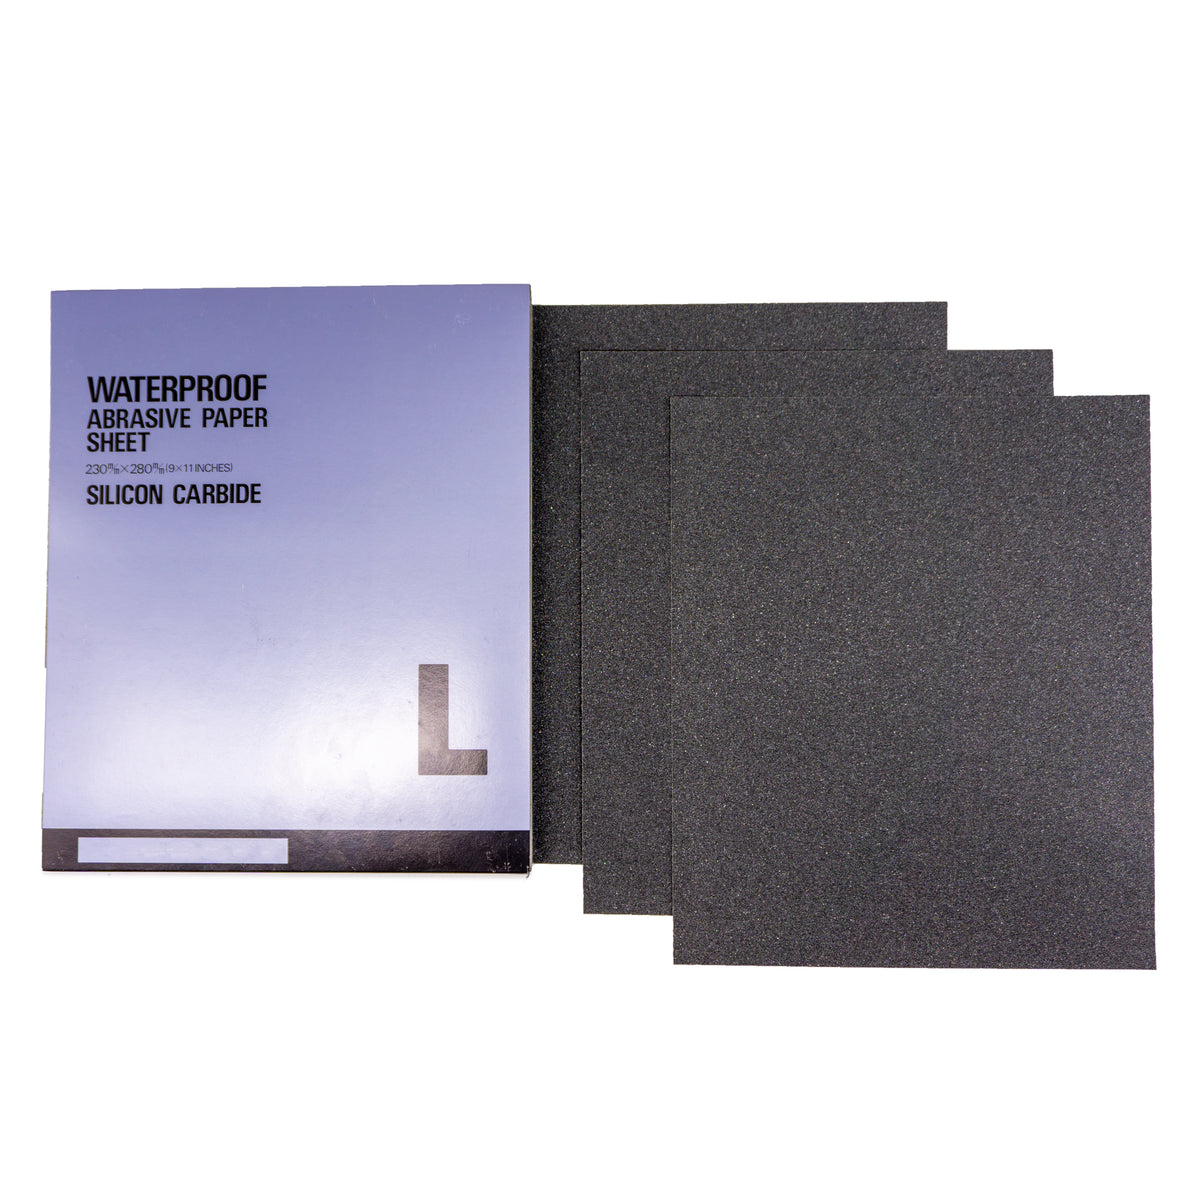 50-pack of 9&quot; x 11&quot; wet/dry sheets for auto body, made with silicon carbide, suitable for versatile wet and dry sanding applications